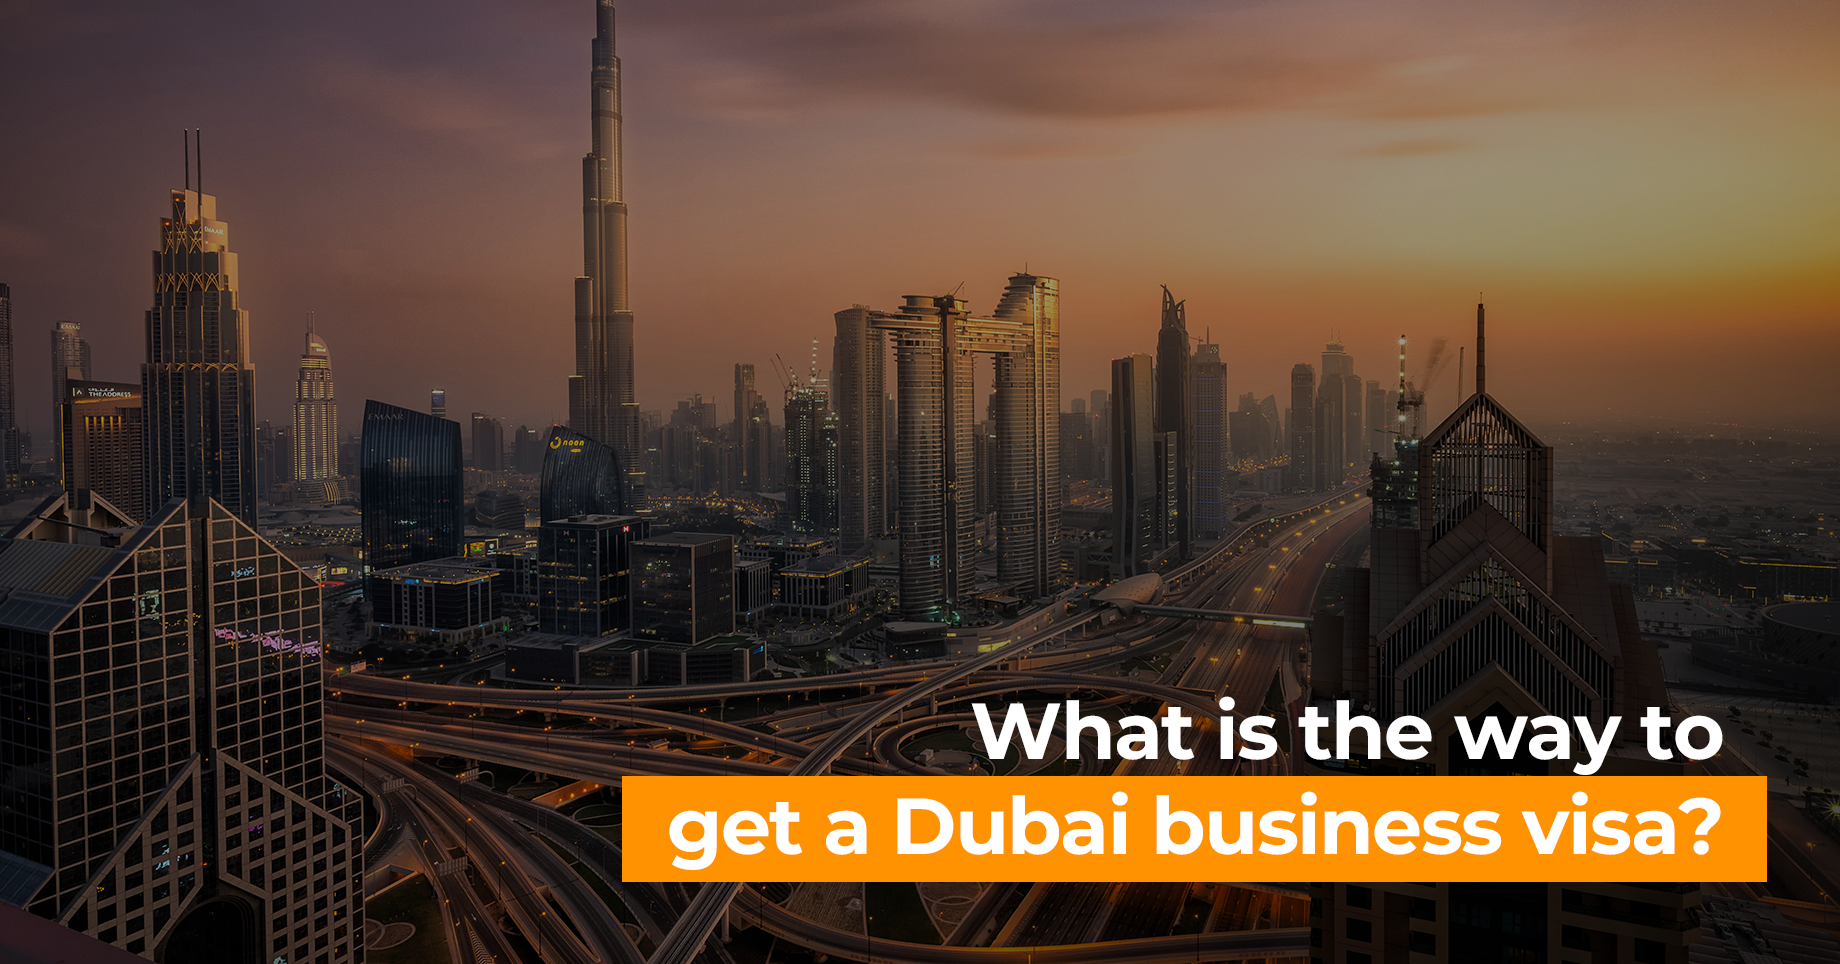 What is the way to get a Dubai business visa?